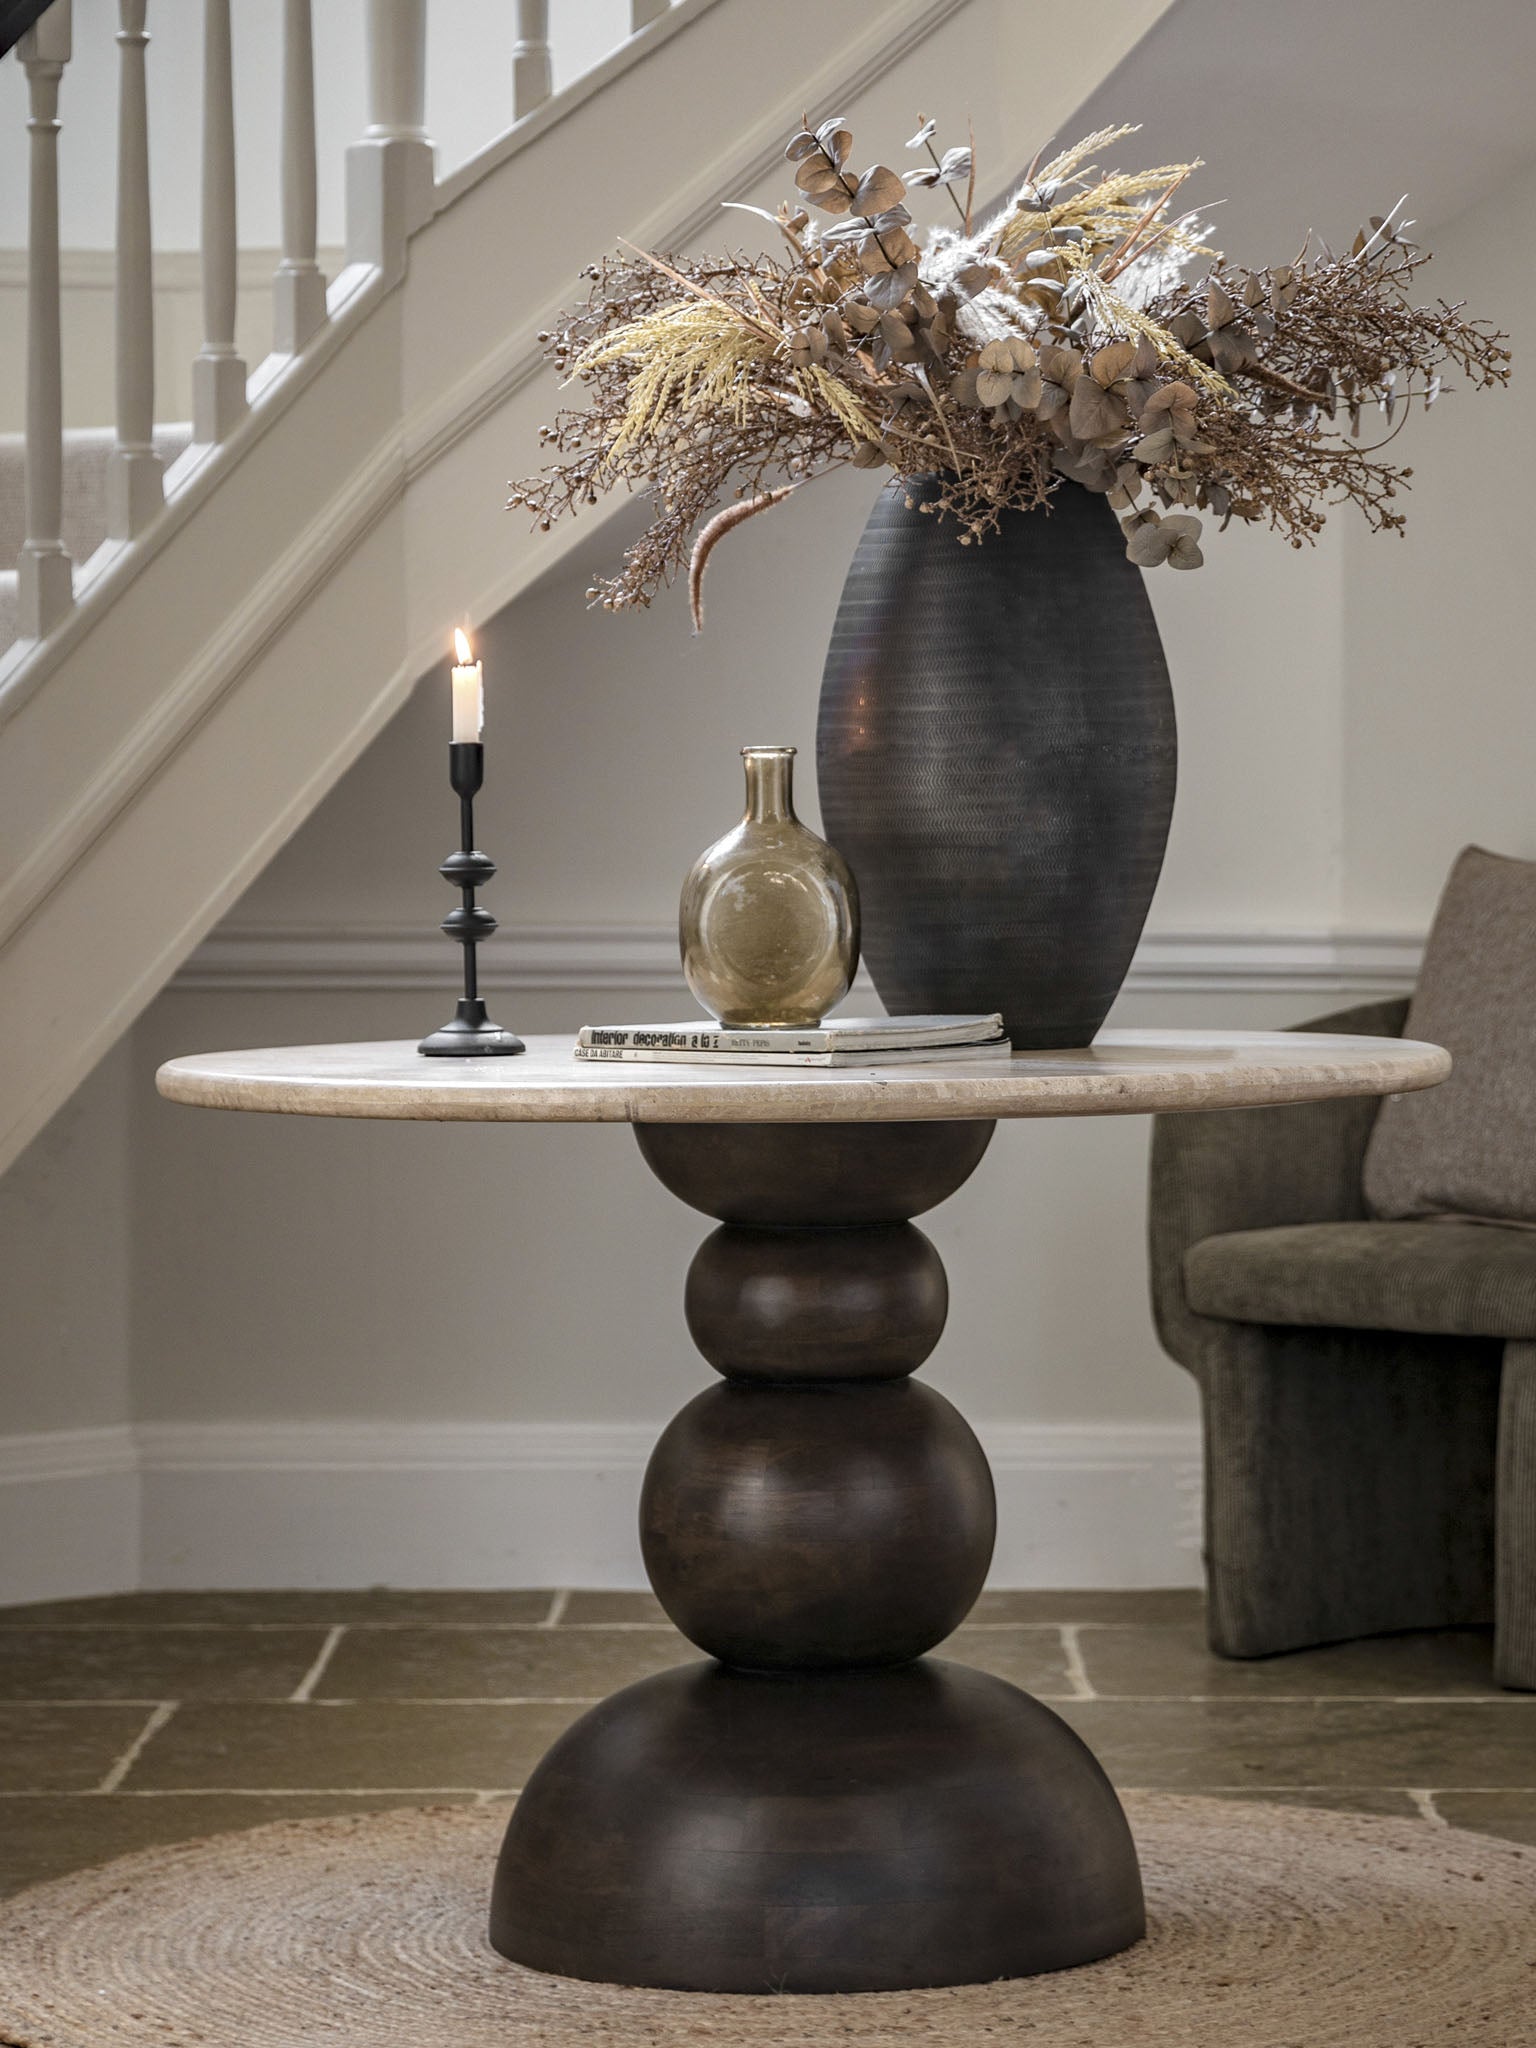 Travertine top round dining table